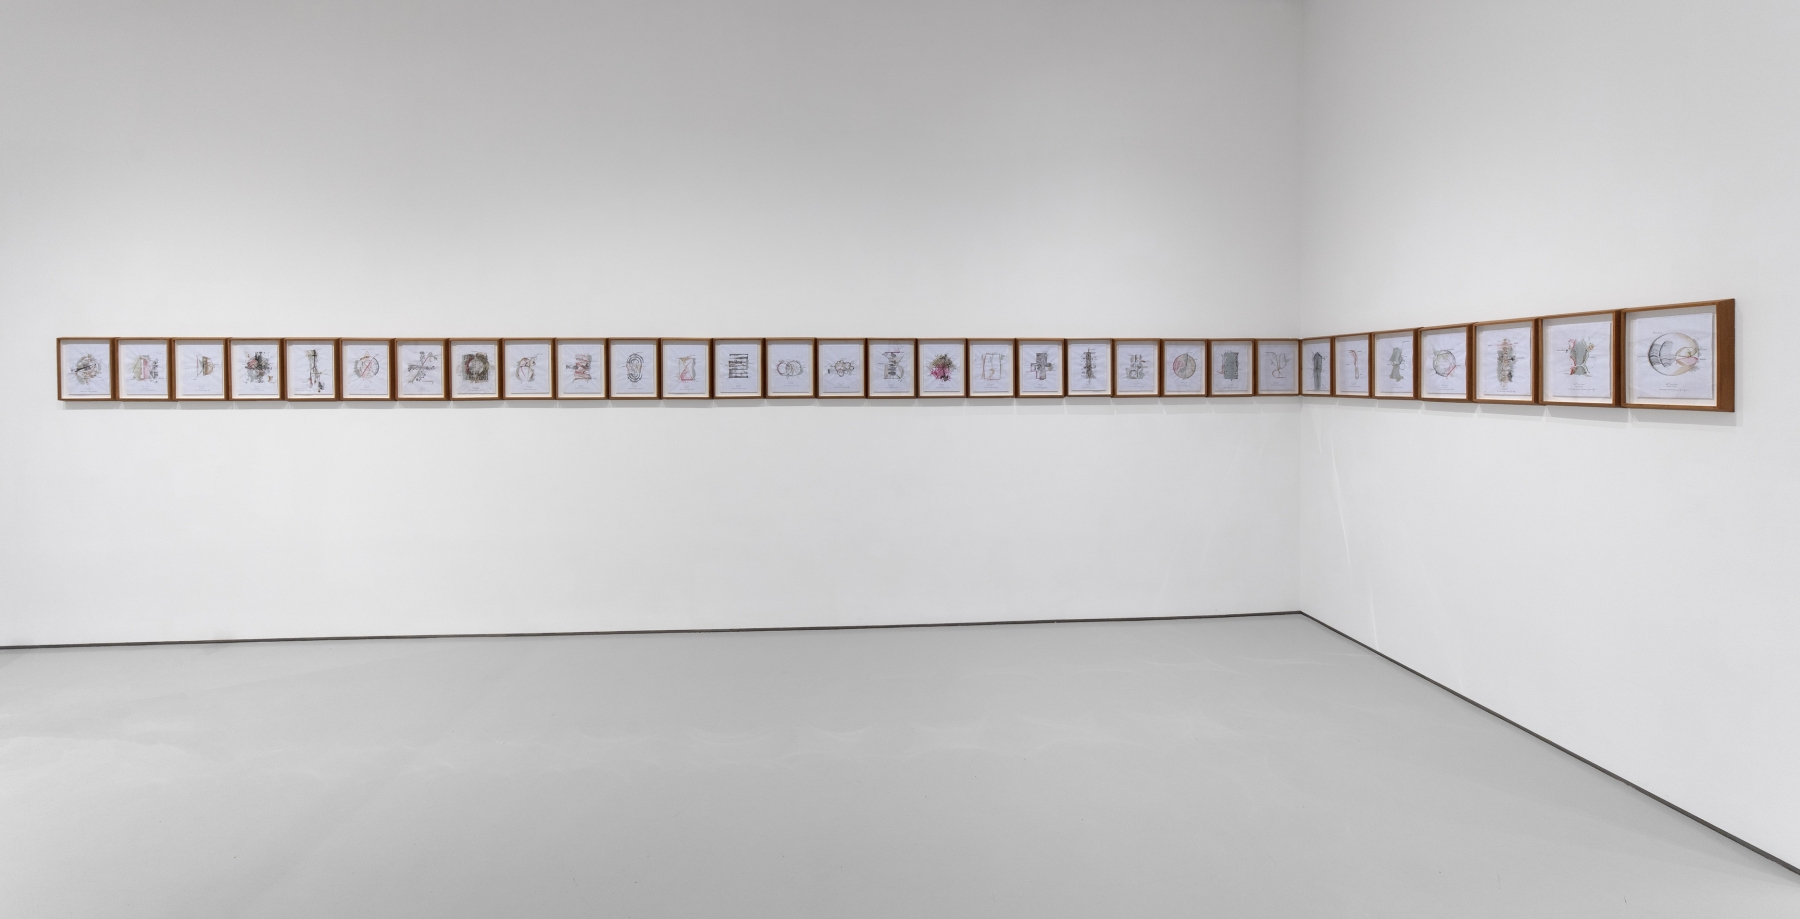 Jitish&amp;nbsp;Kallat
Integer Studies (Drawings from Life), 2021
Graphite and aquarelle pencil, stained gesso, organic gum on Bienfang Gridded Paper
suite of 31 drawings, 11 1/2 x 14 1/8 inches (29,2 x 35,9 cm) each
SW 21155
&amp;nbsp;